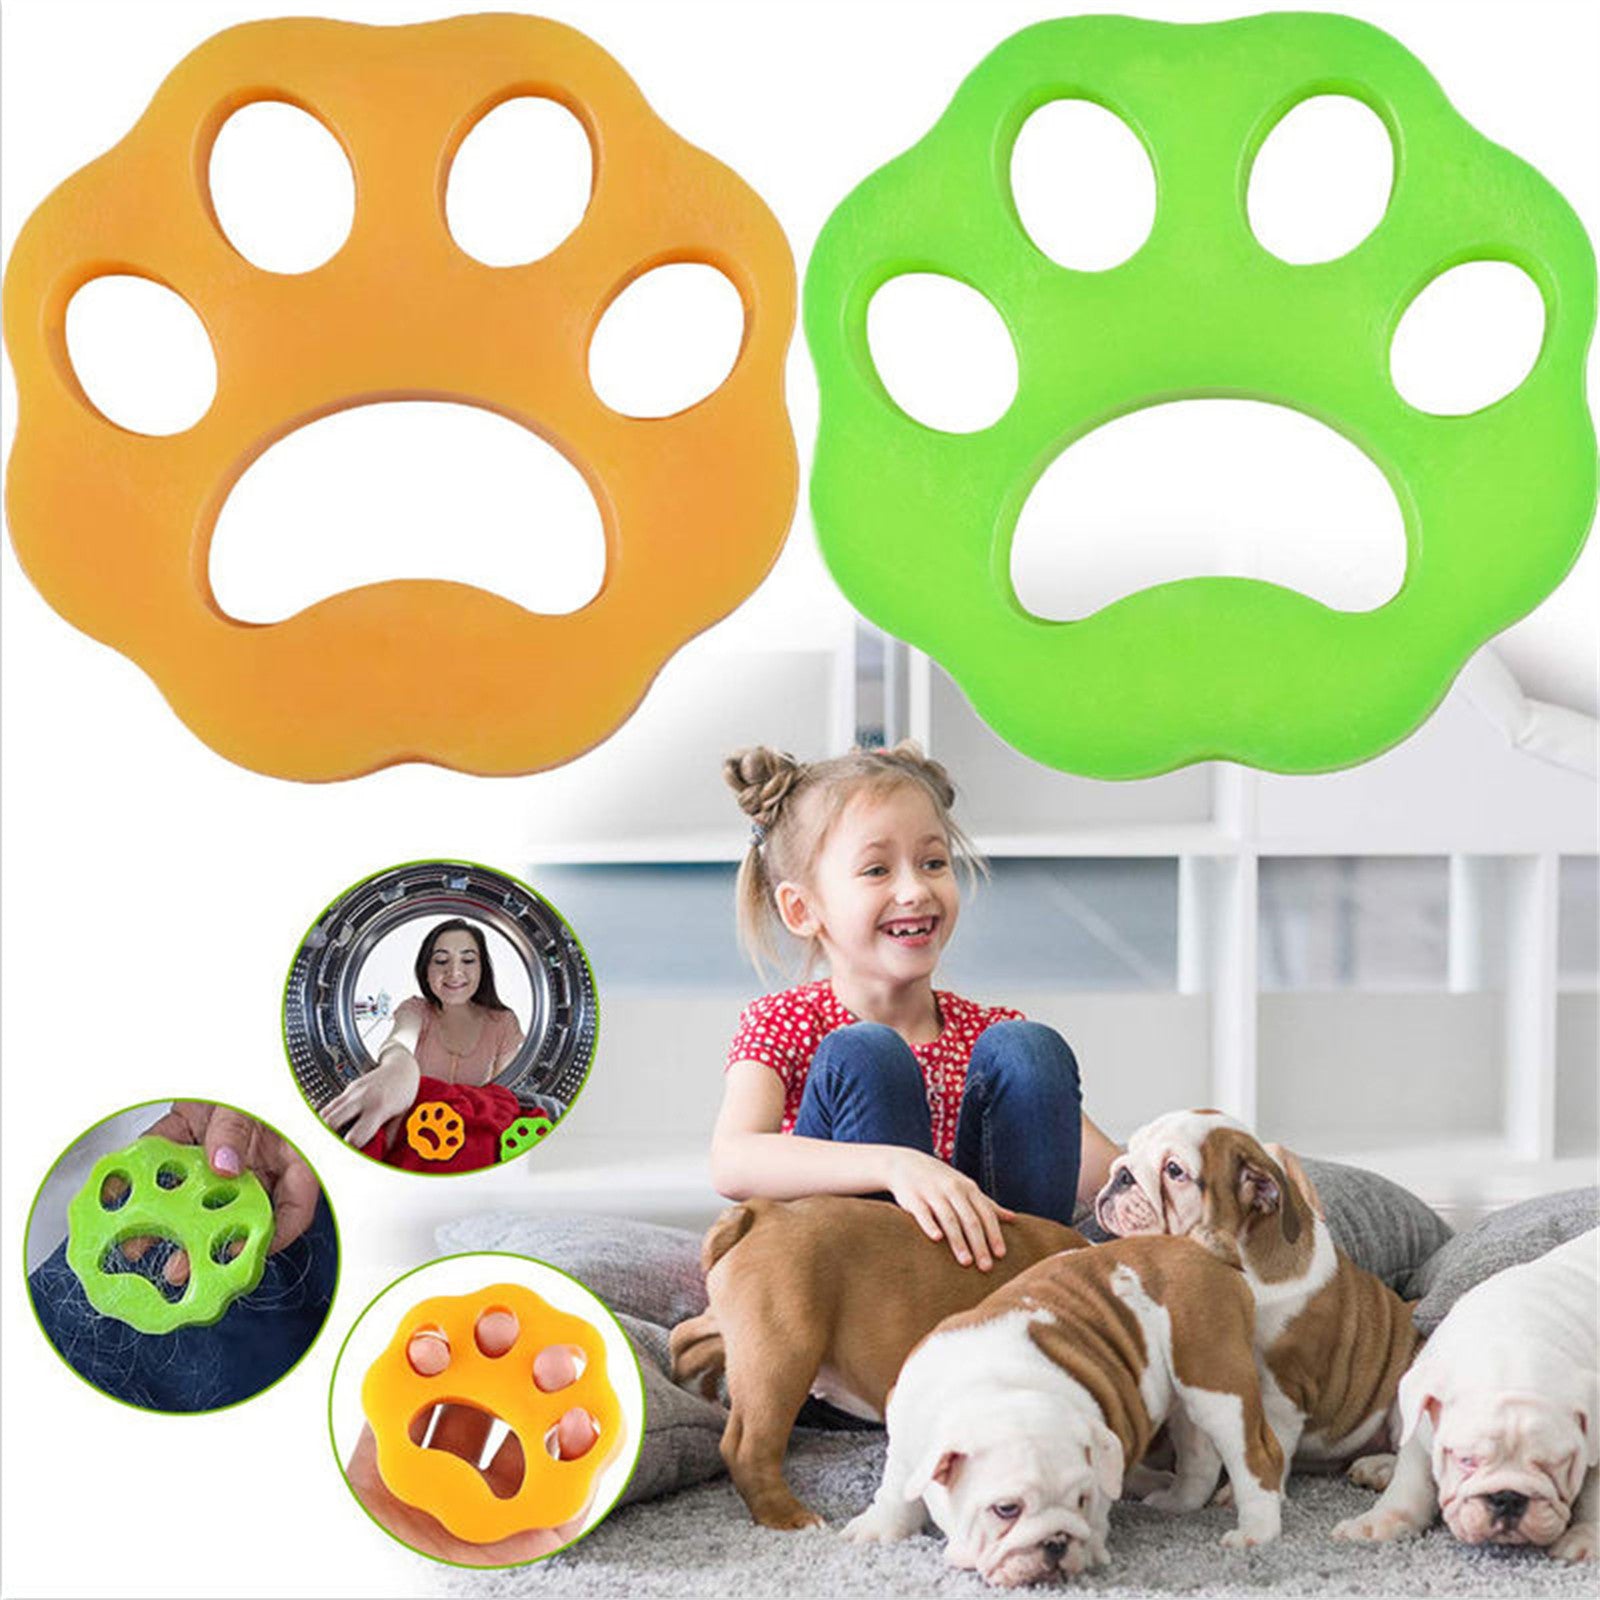 Pawfriends Soft Silicone Pet Hair Remover Clothes Cleaning Lint Catcher Solid Laundry Ball - SILBERSHELL